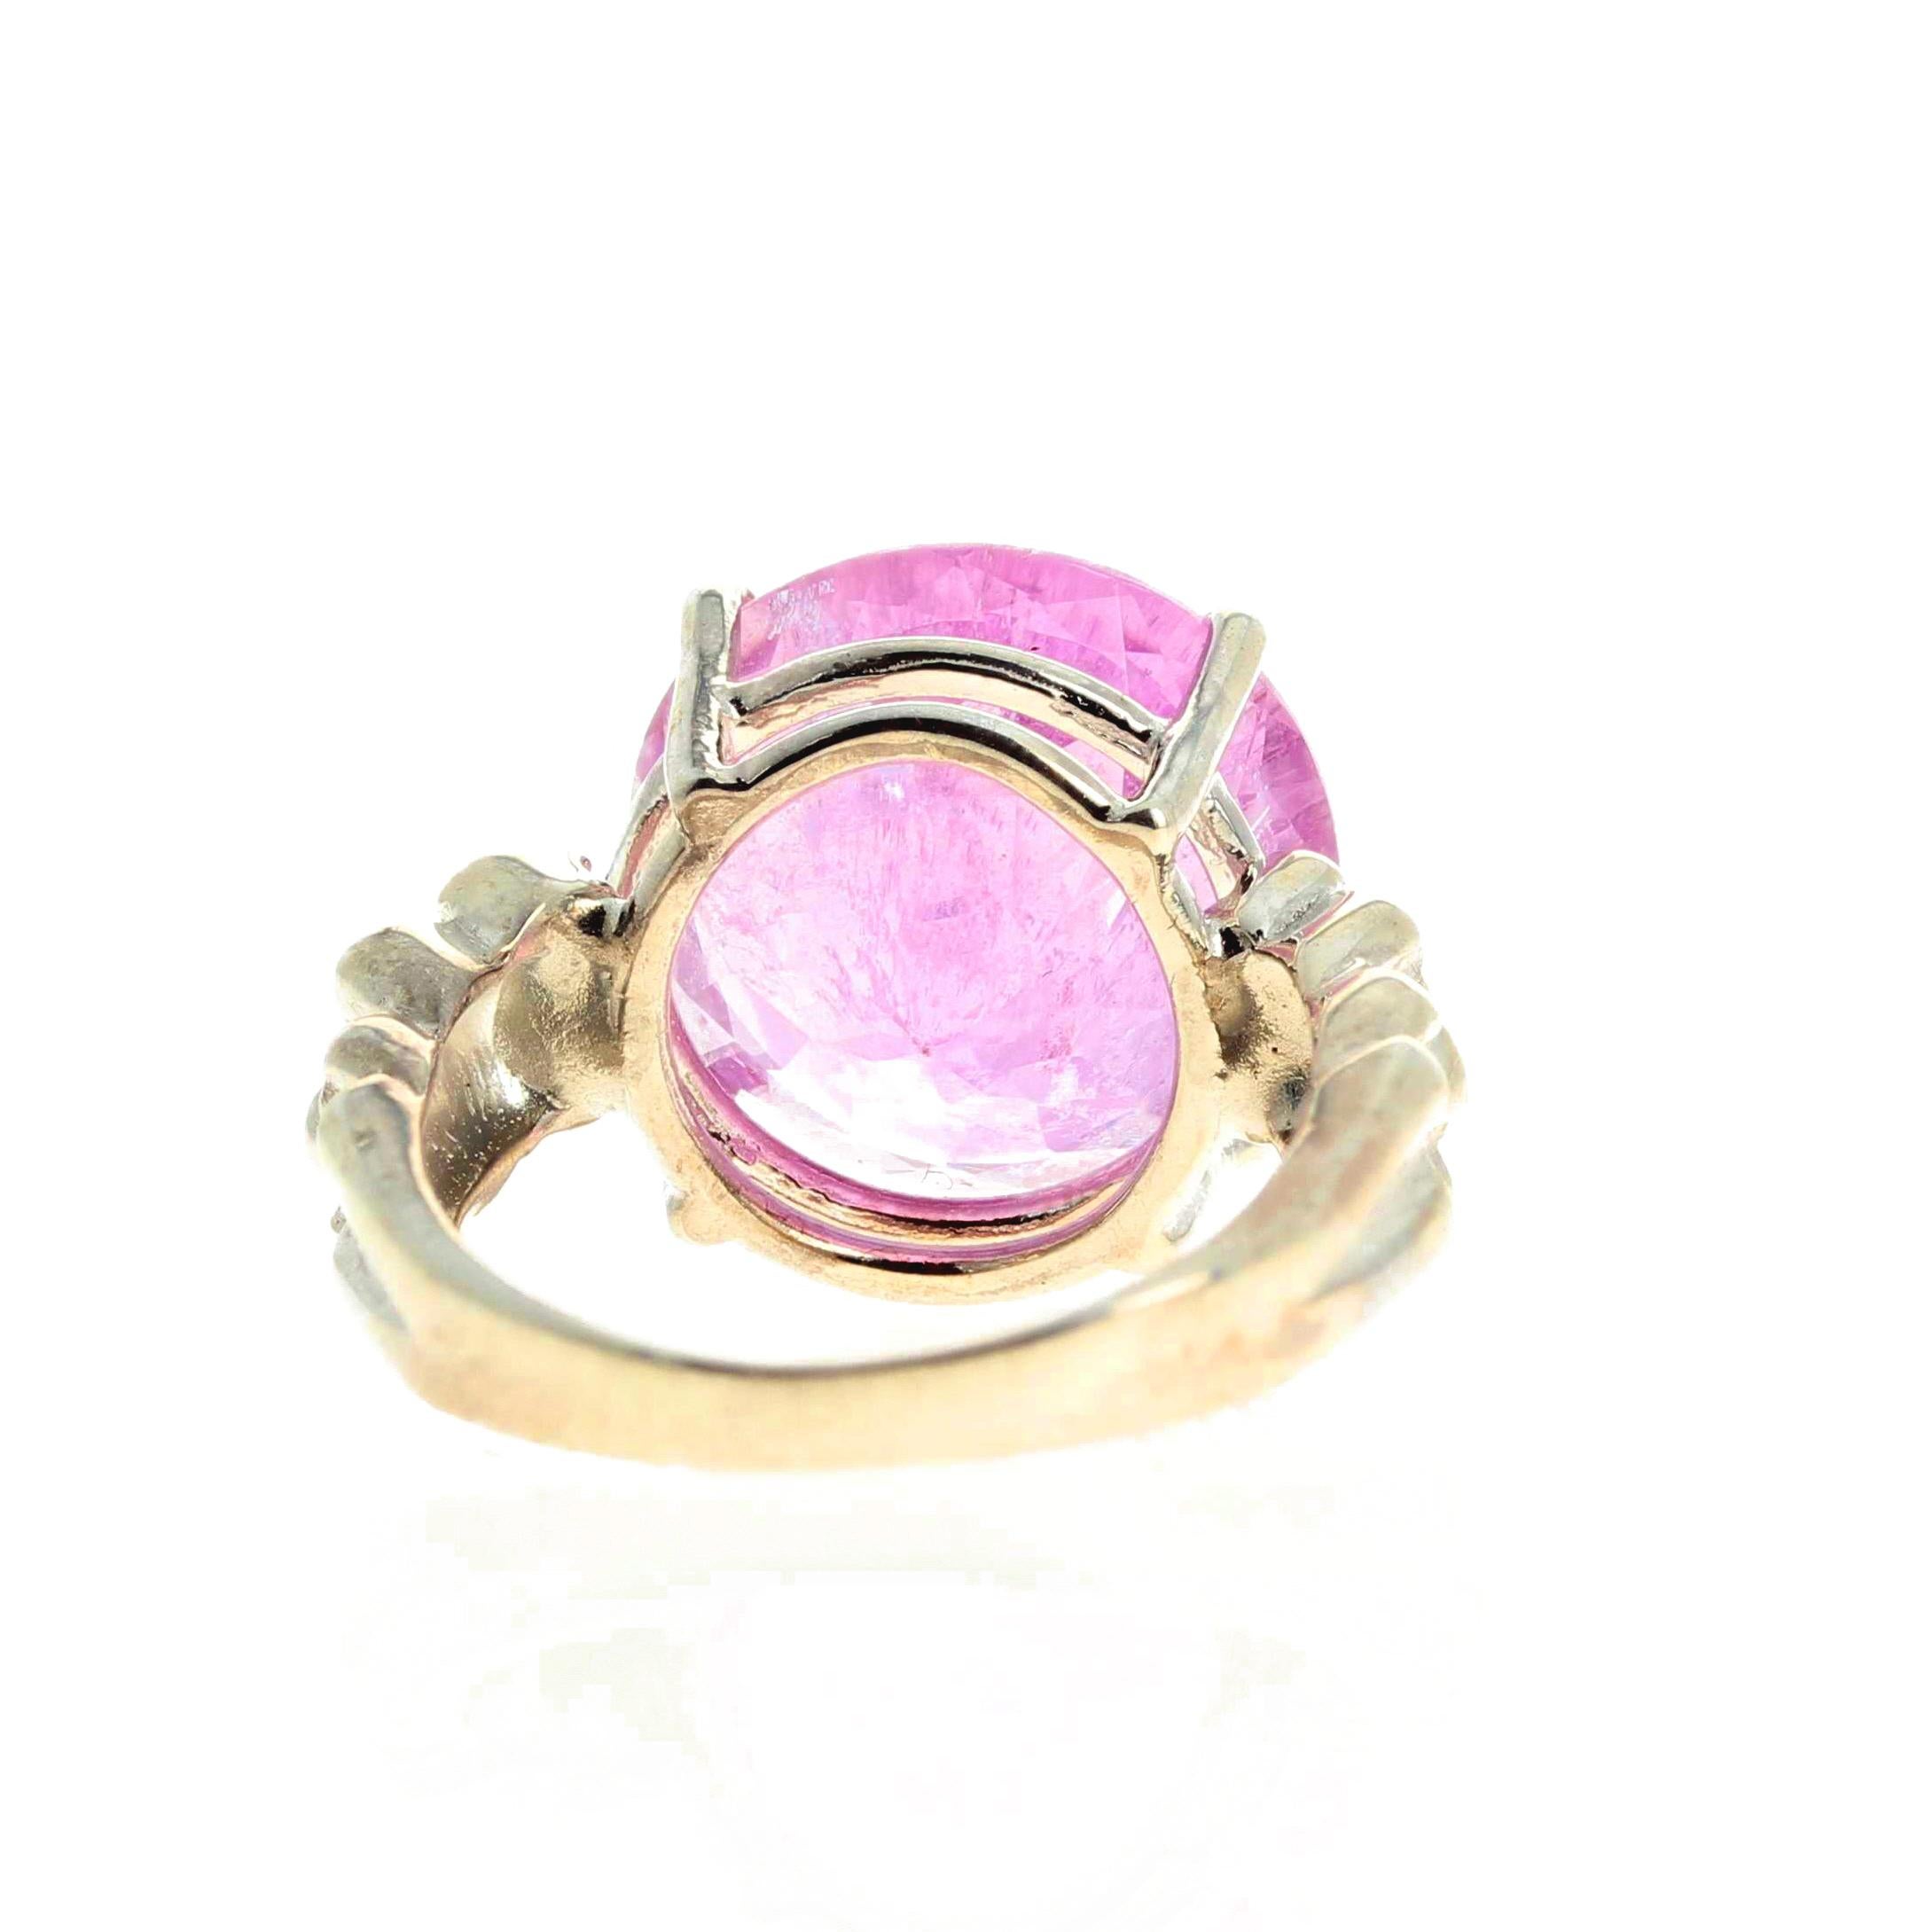 AJD Extraordinary Sparkling 13.5Ct BrightPinky Kunzite Silver Cocktail Ring For Sale 2